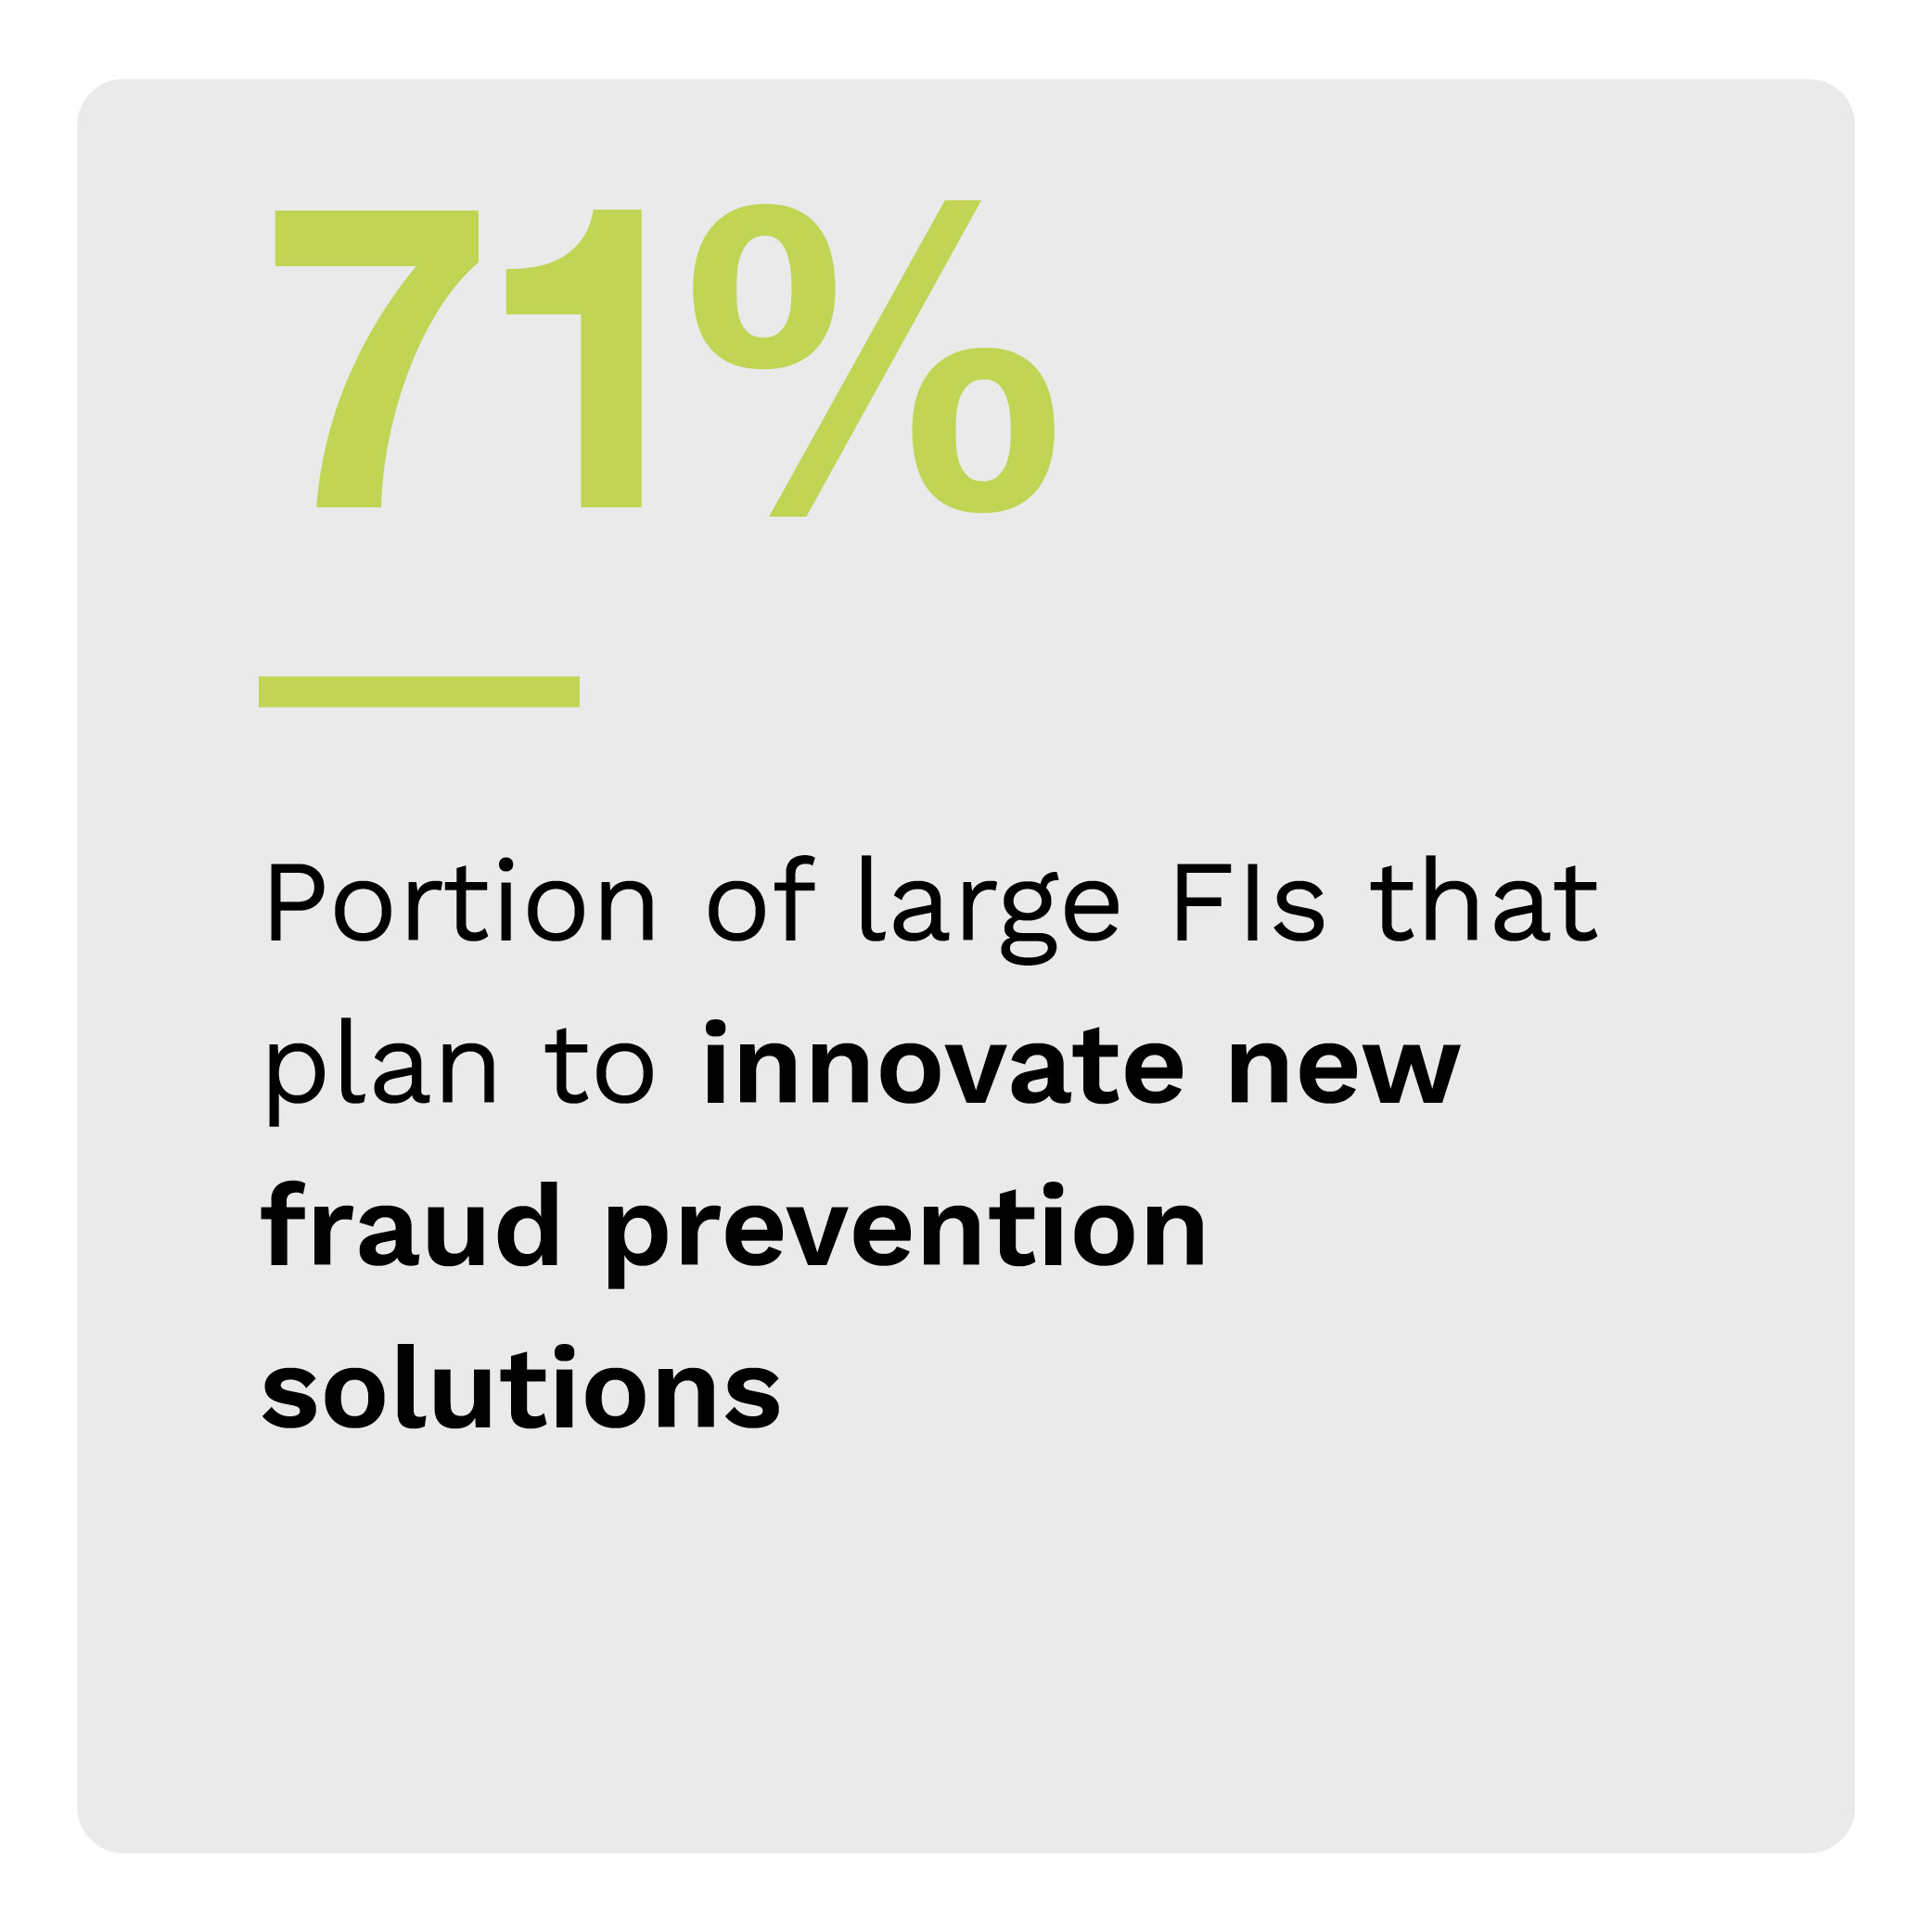 71%: Portion of large FIs that plan to innovate new fraud prevention solutions